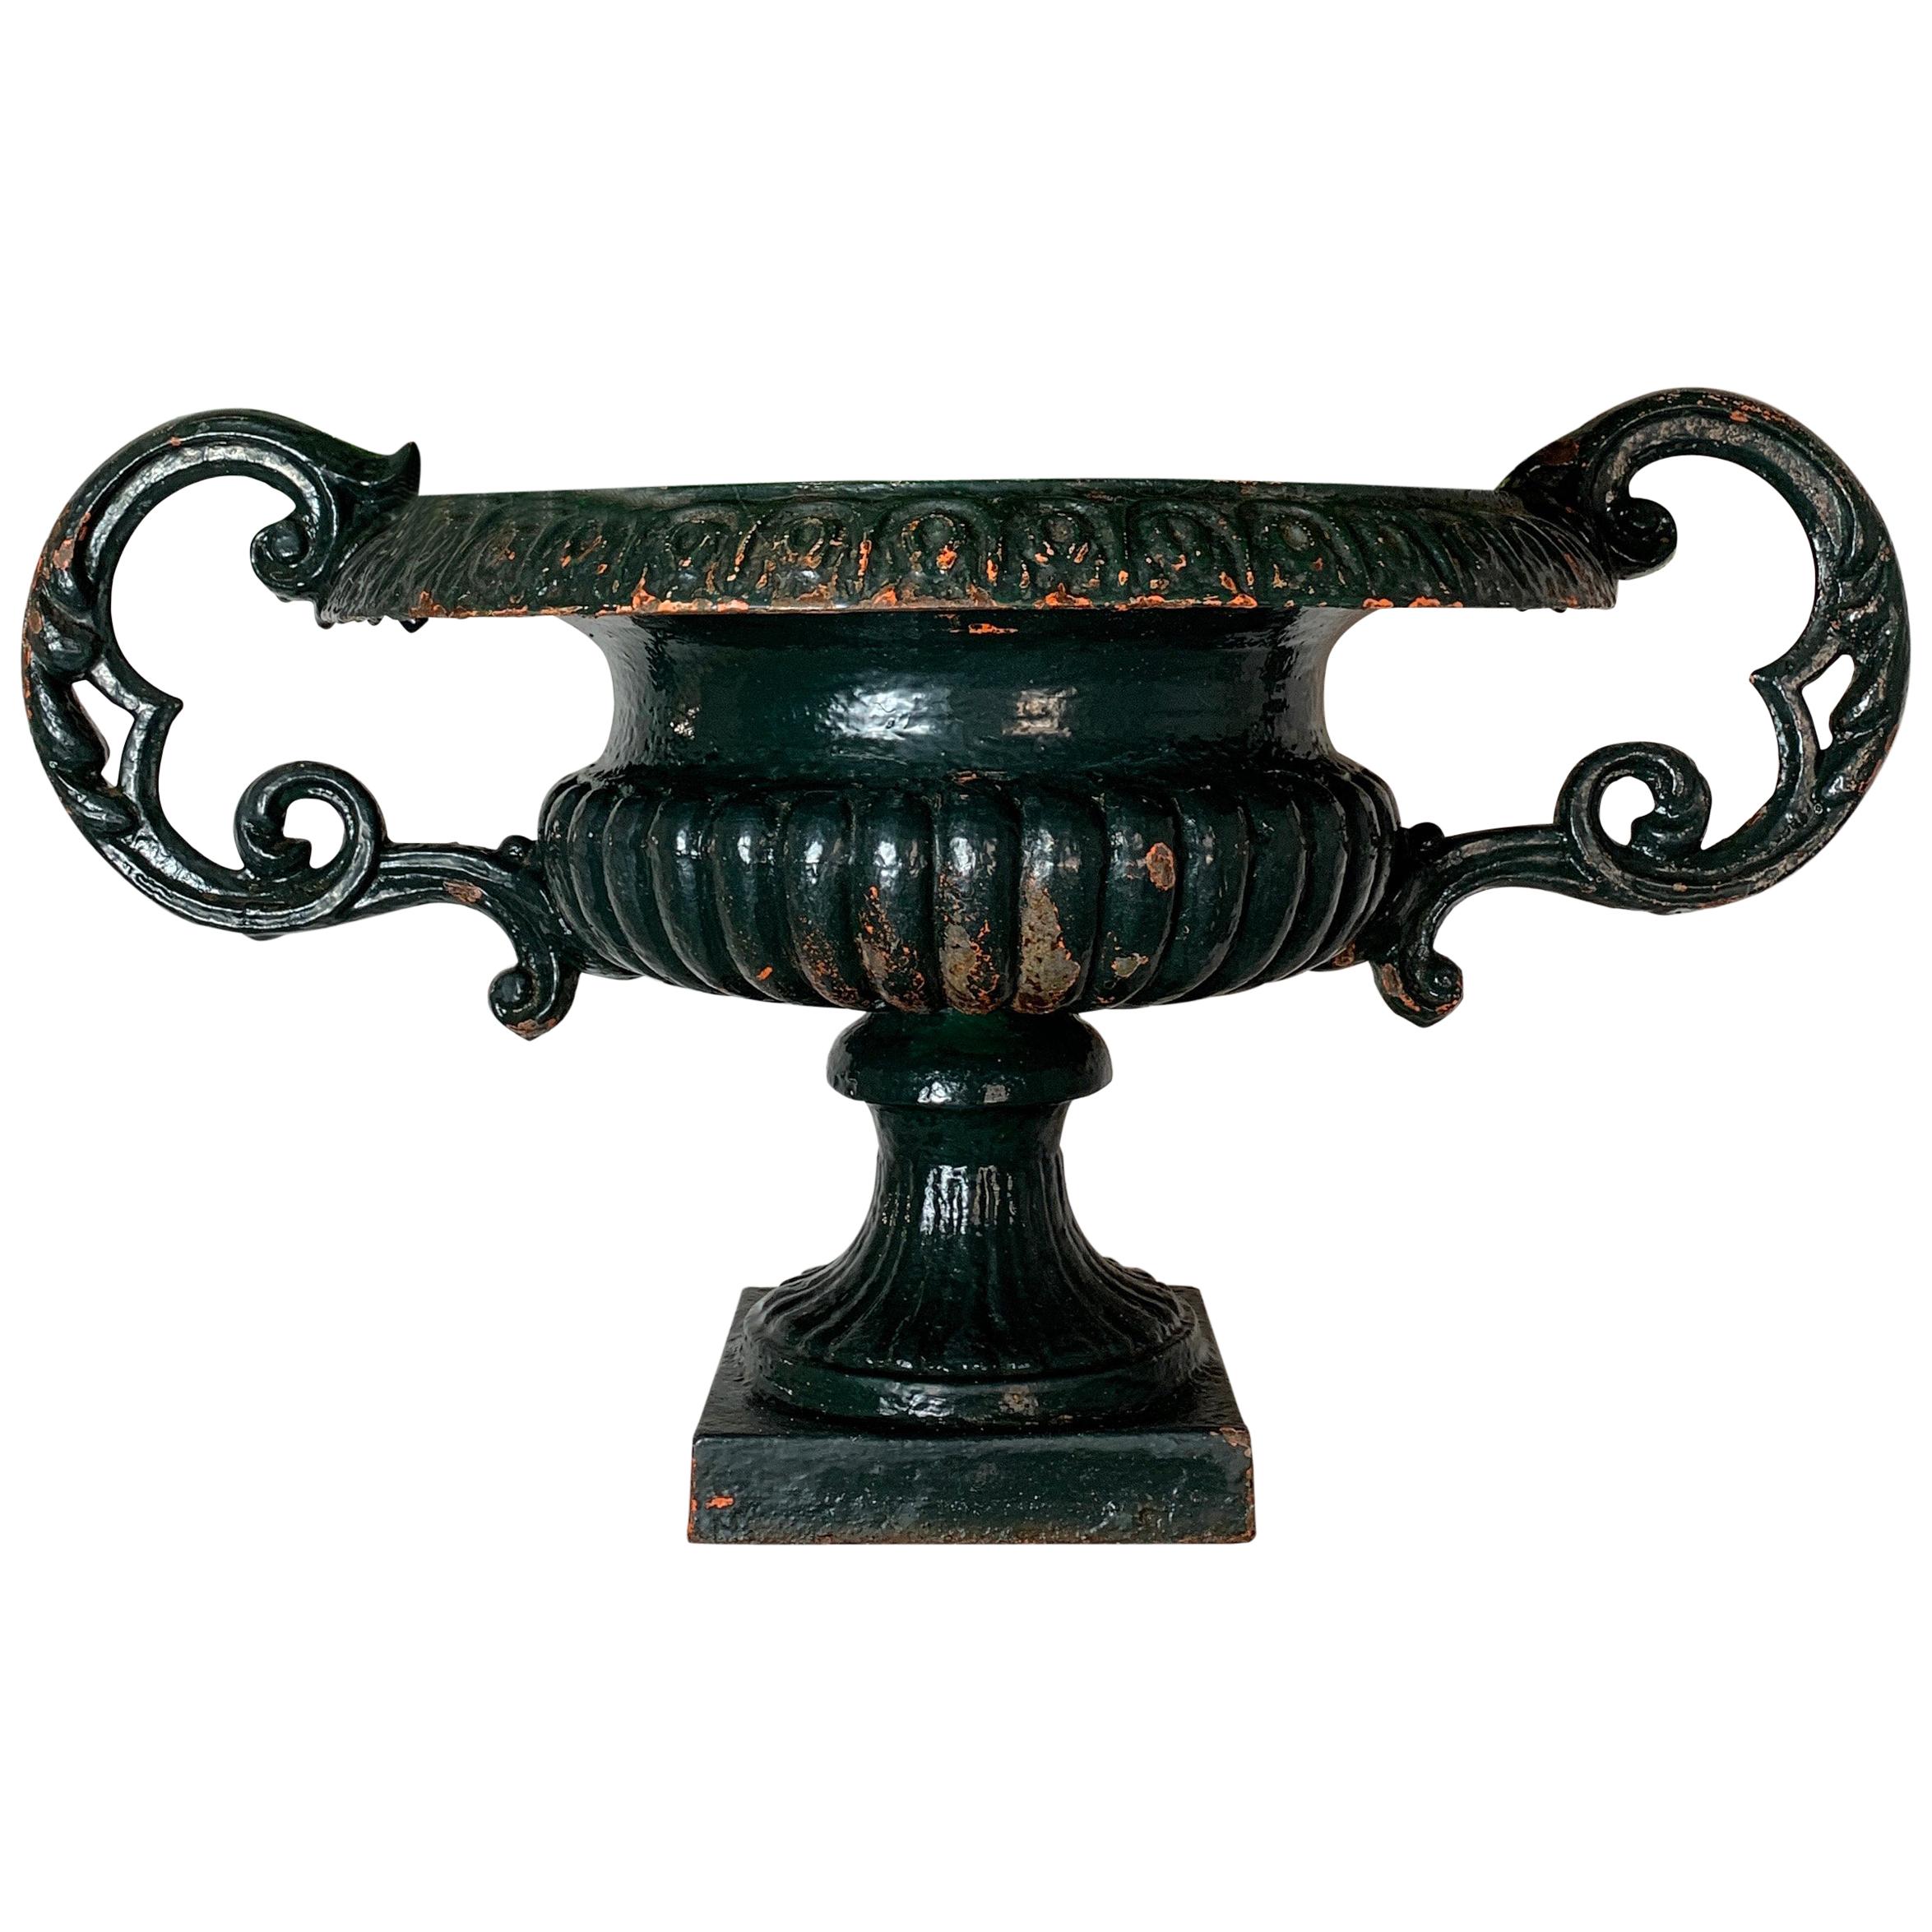 19th Century French Cast Iron Urn with Decorative Handles